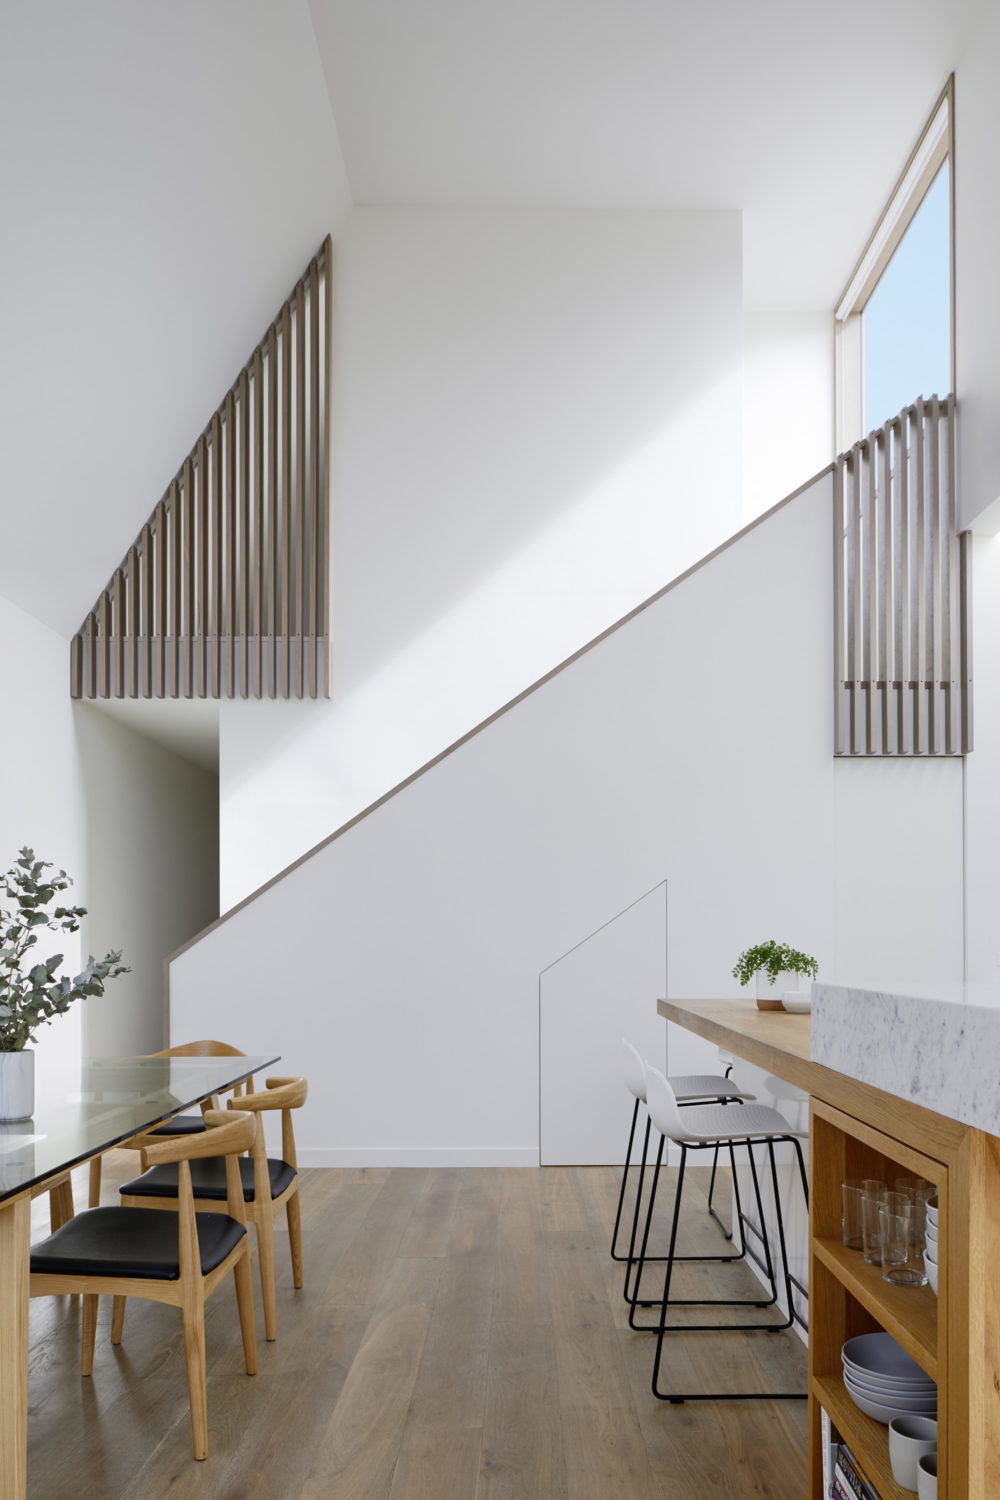 Tess + JJ’s House | Narrow House by po-co Architecture